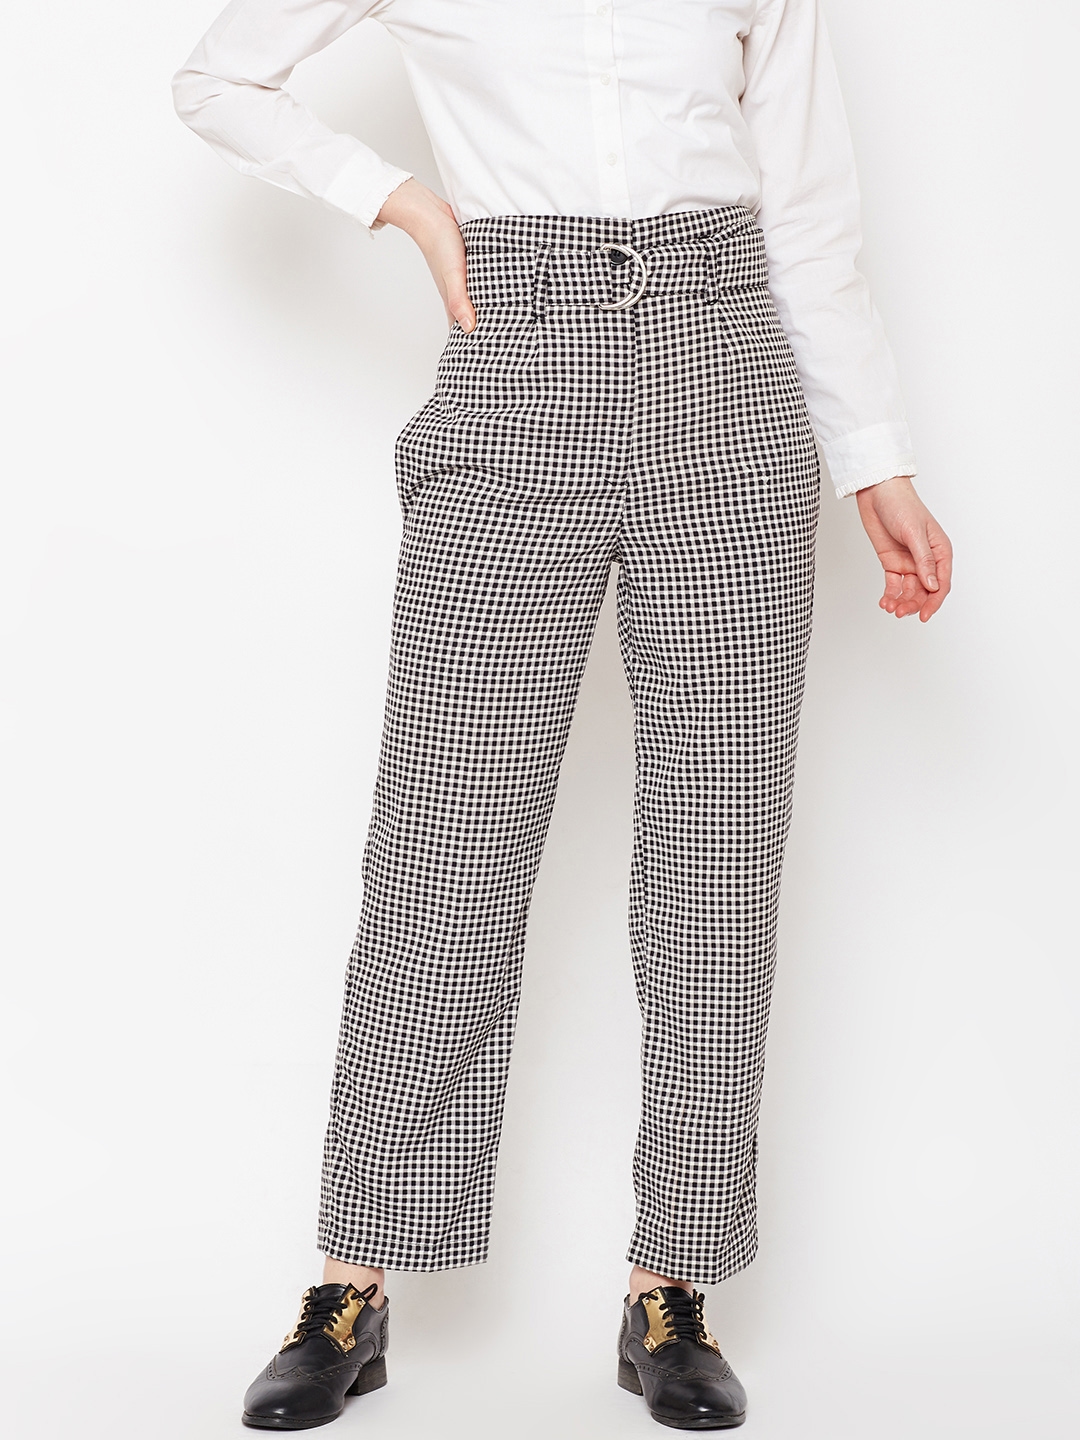 River Island relaxed check trousers in black  ASOS